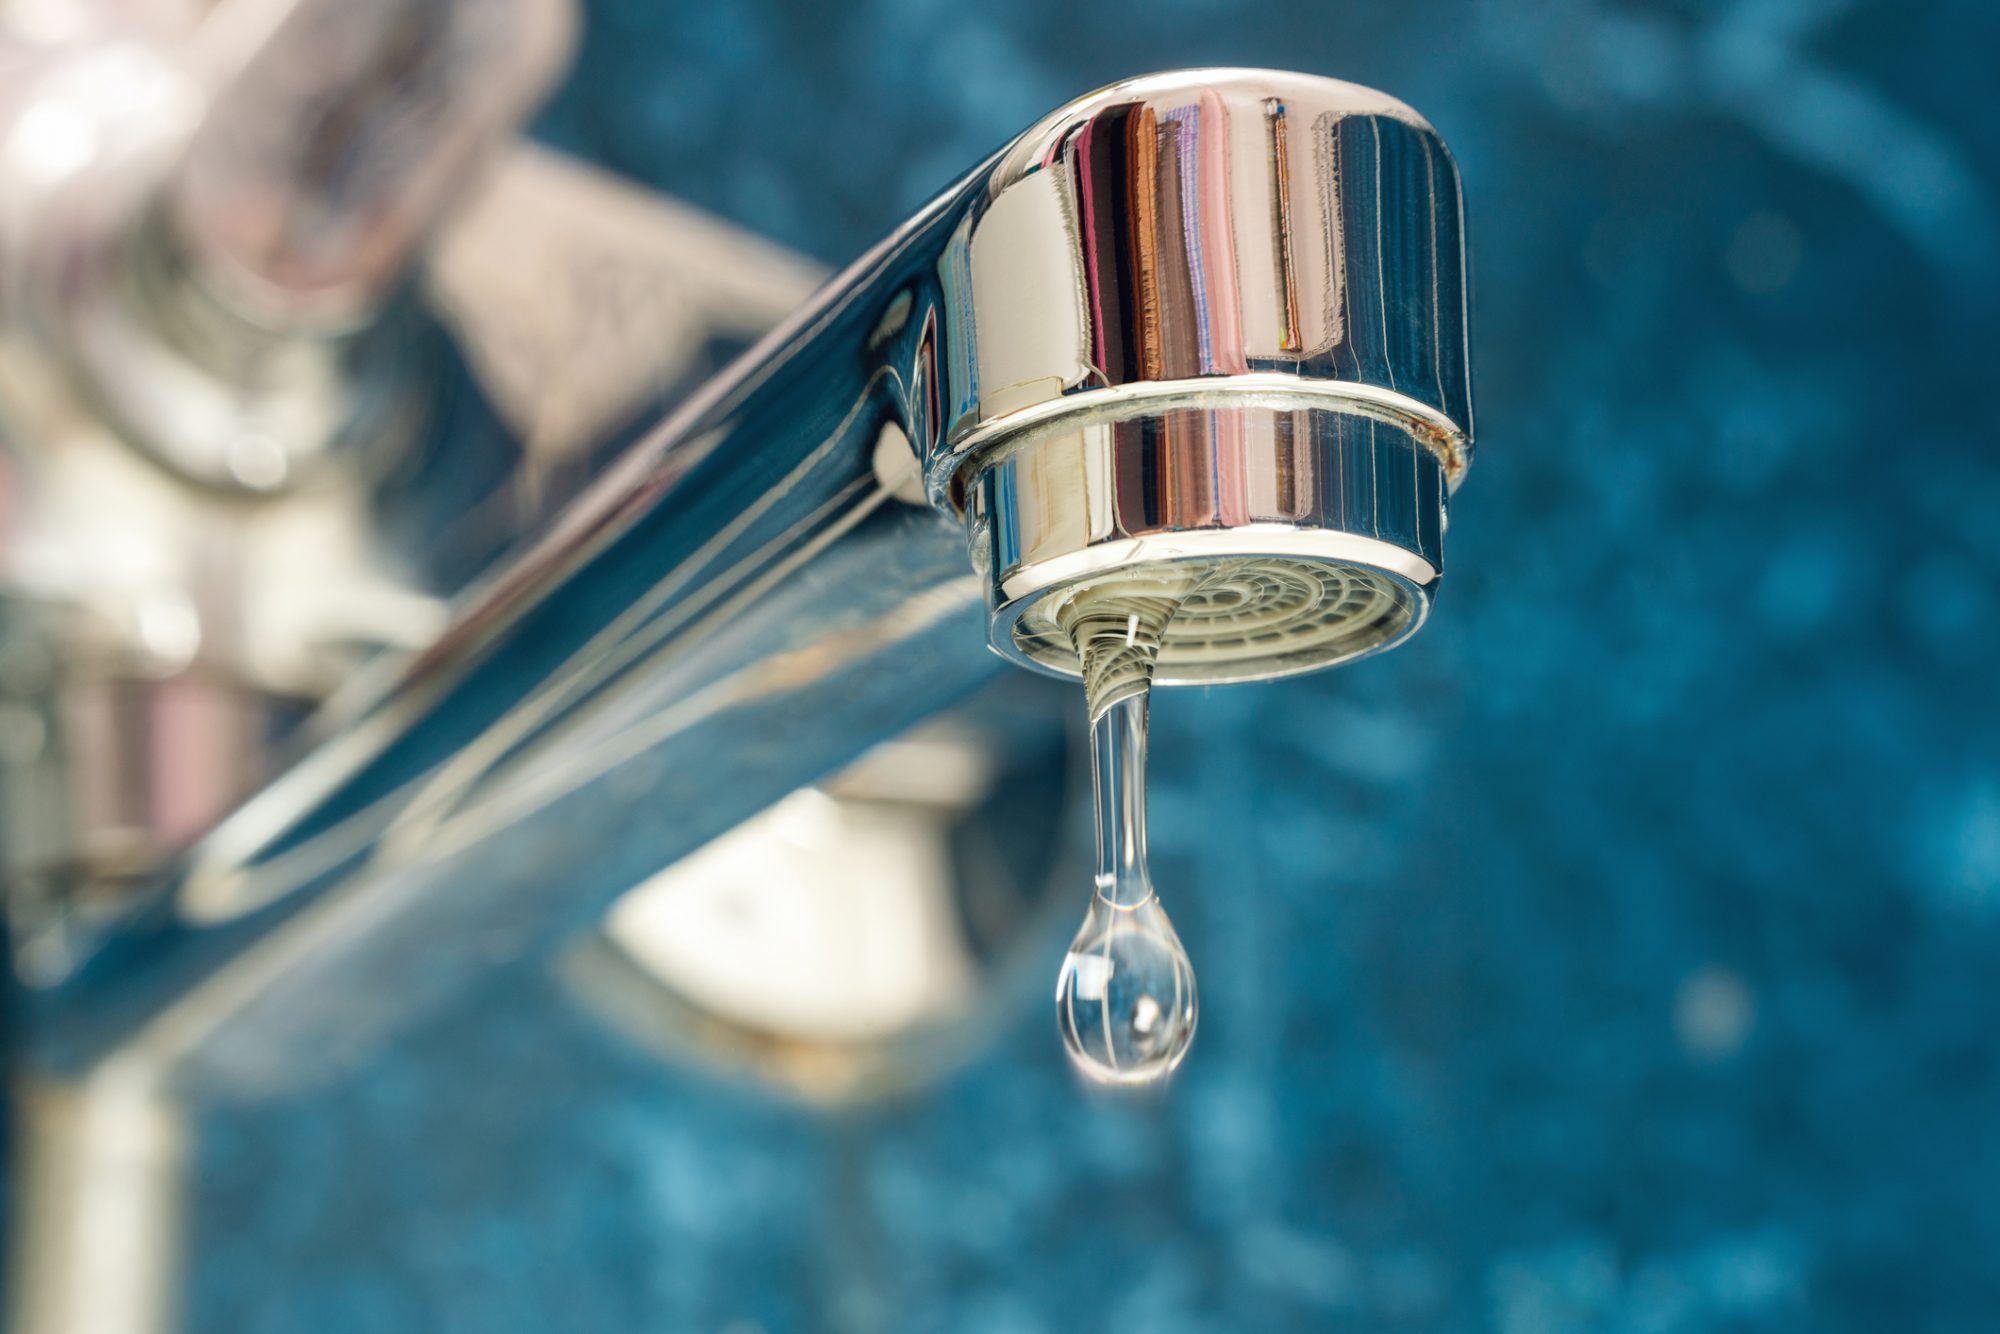 Causes and Consequences of a Leaky Faucet